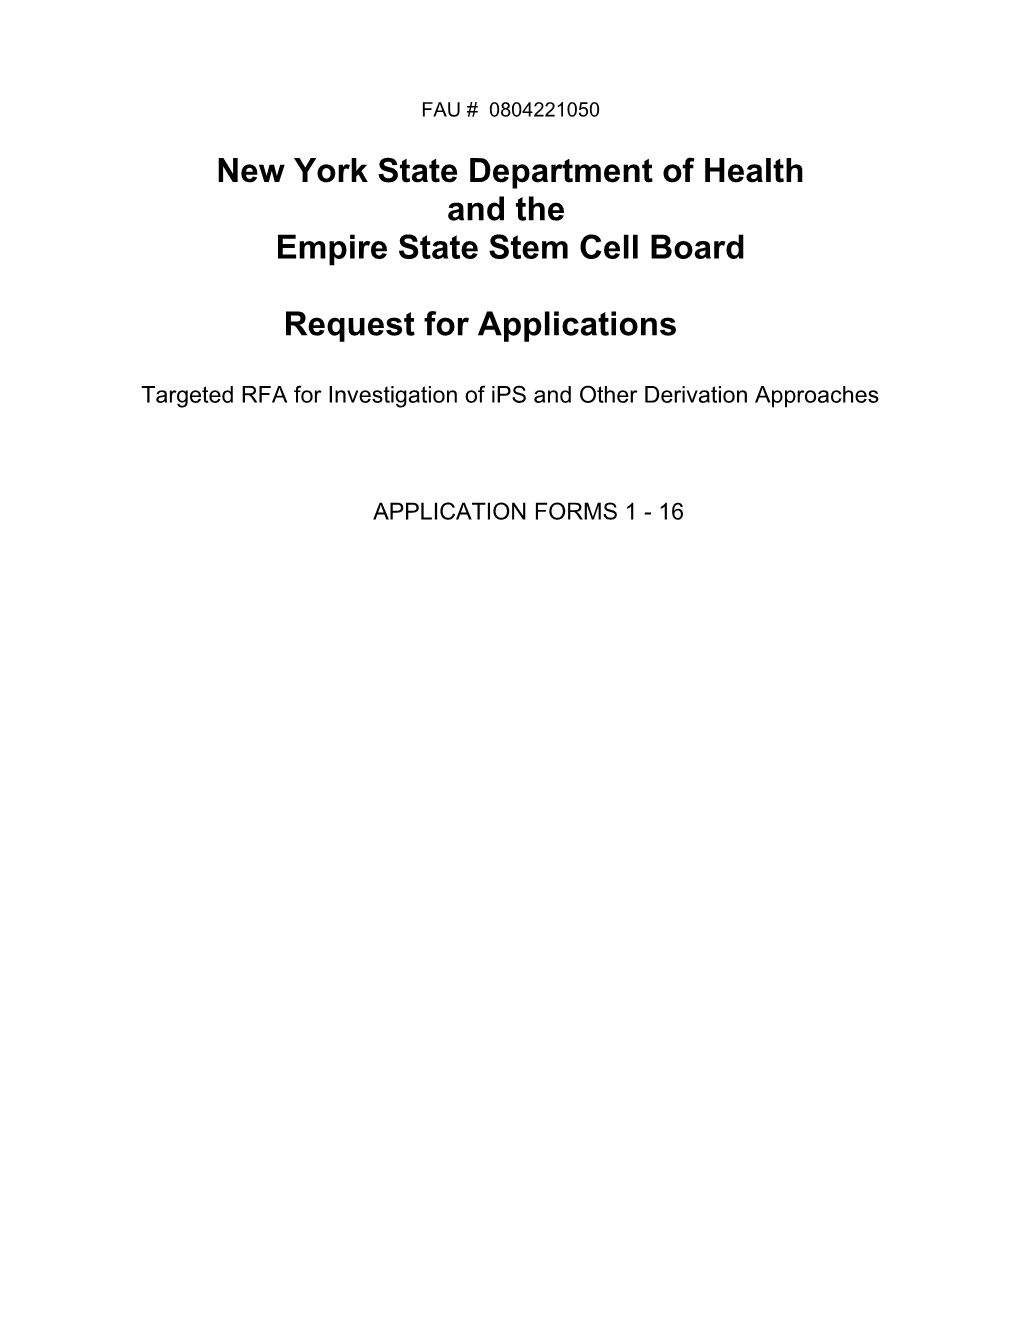 New York State Department of Health s3